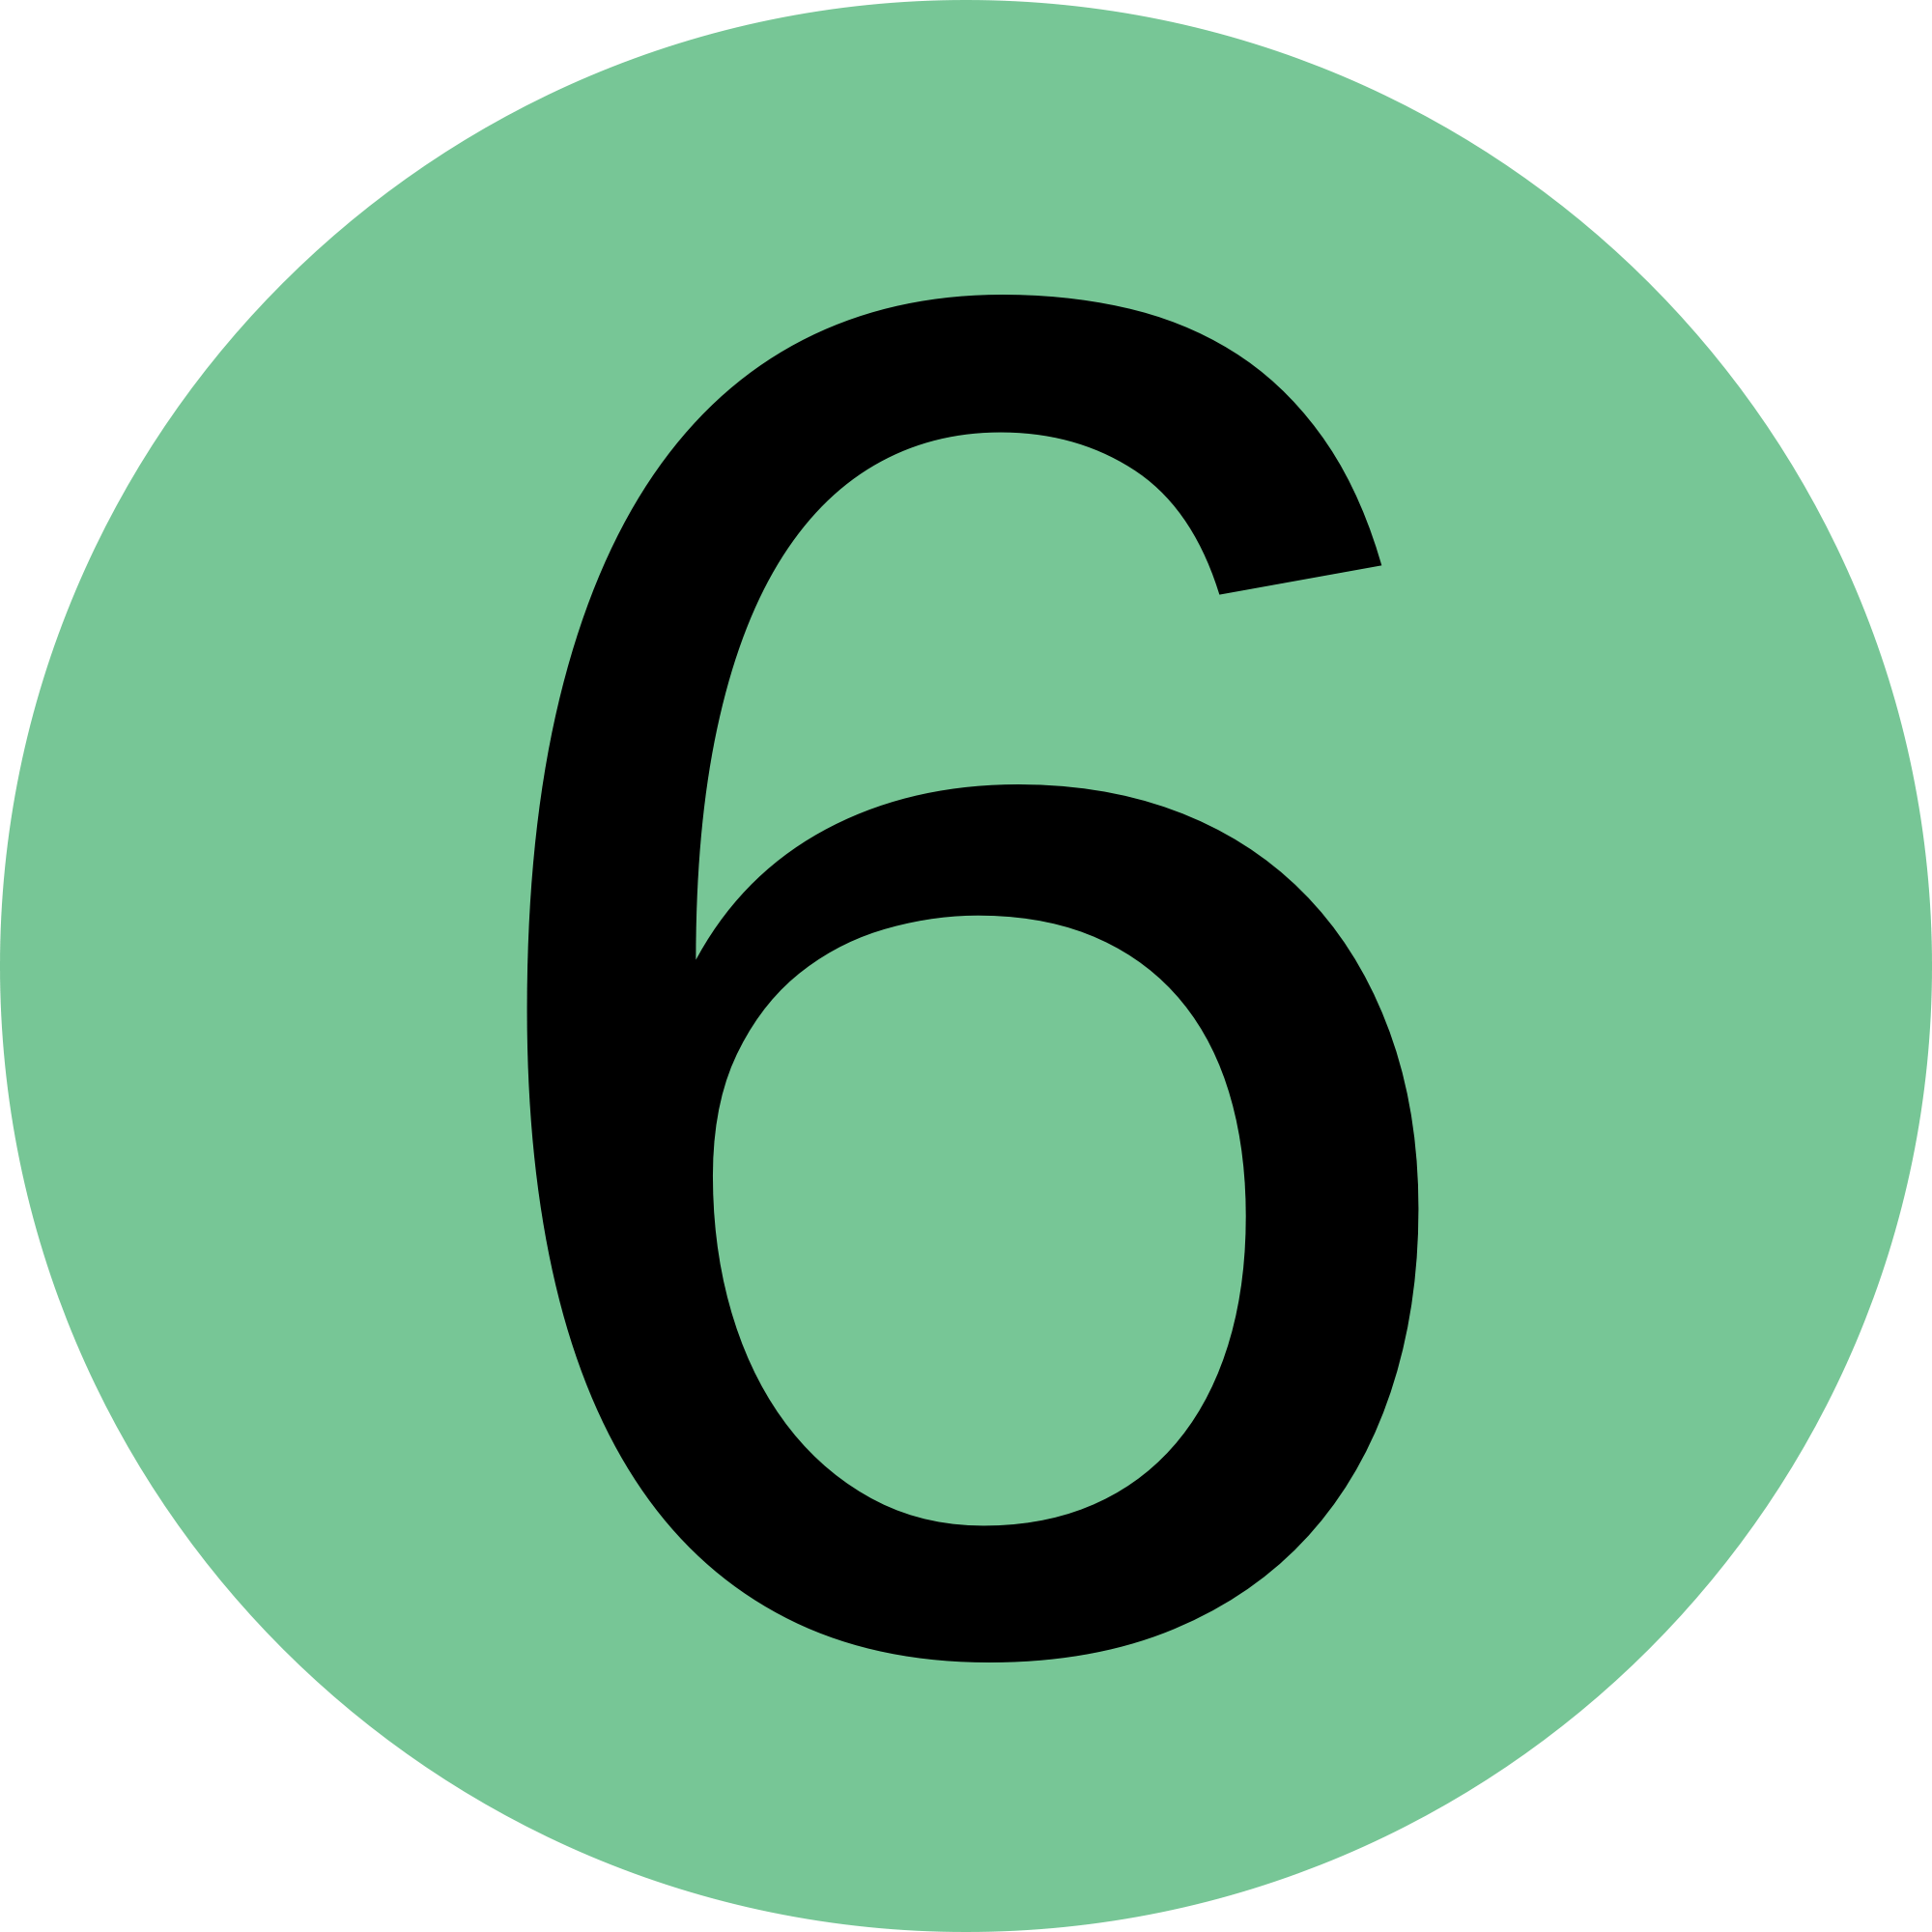 number 6 clipart green